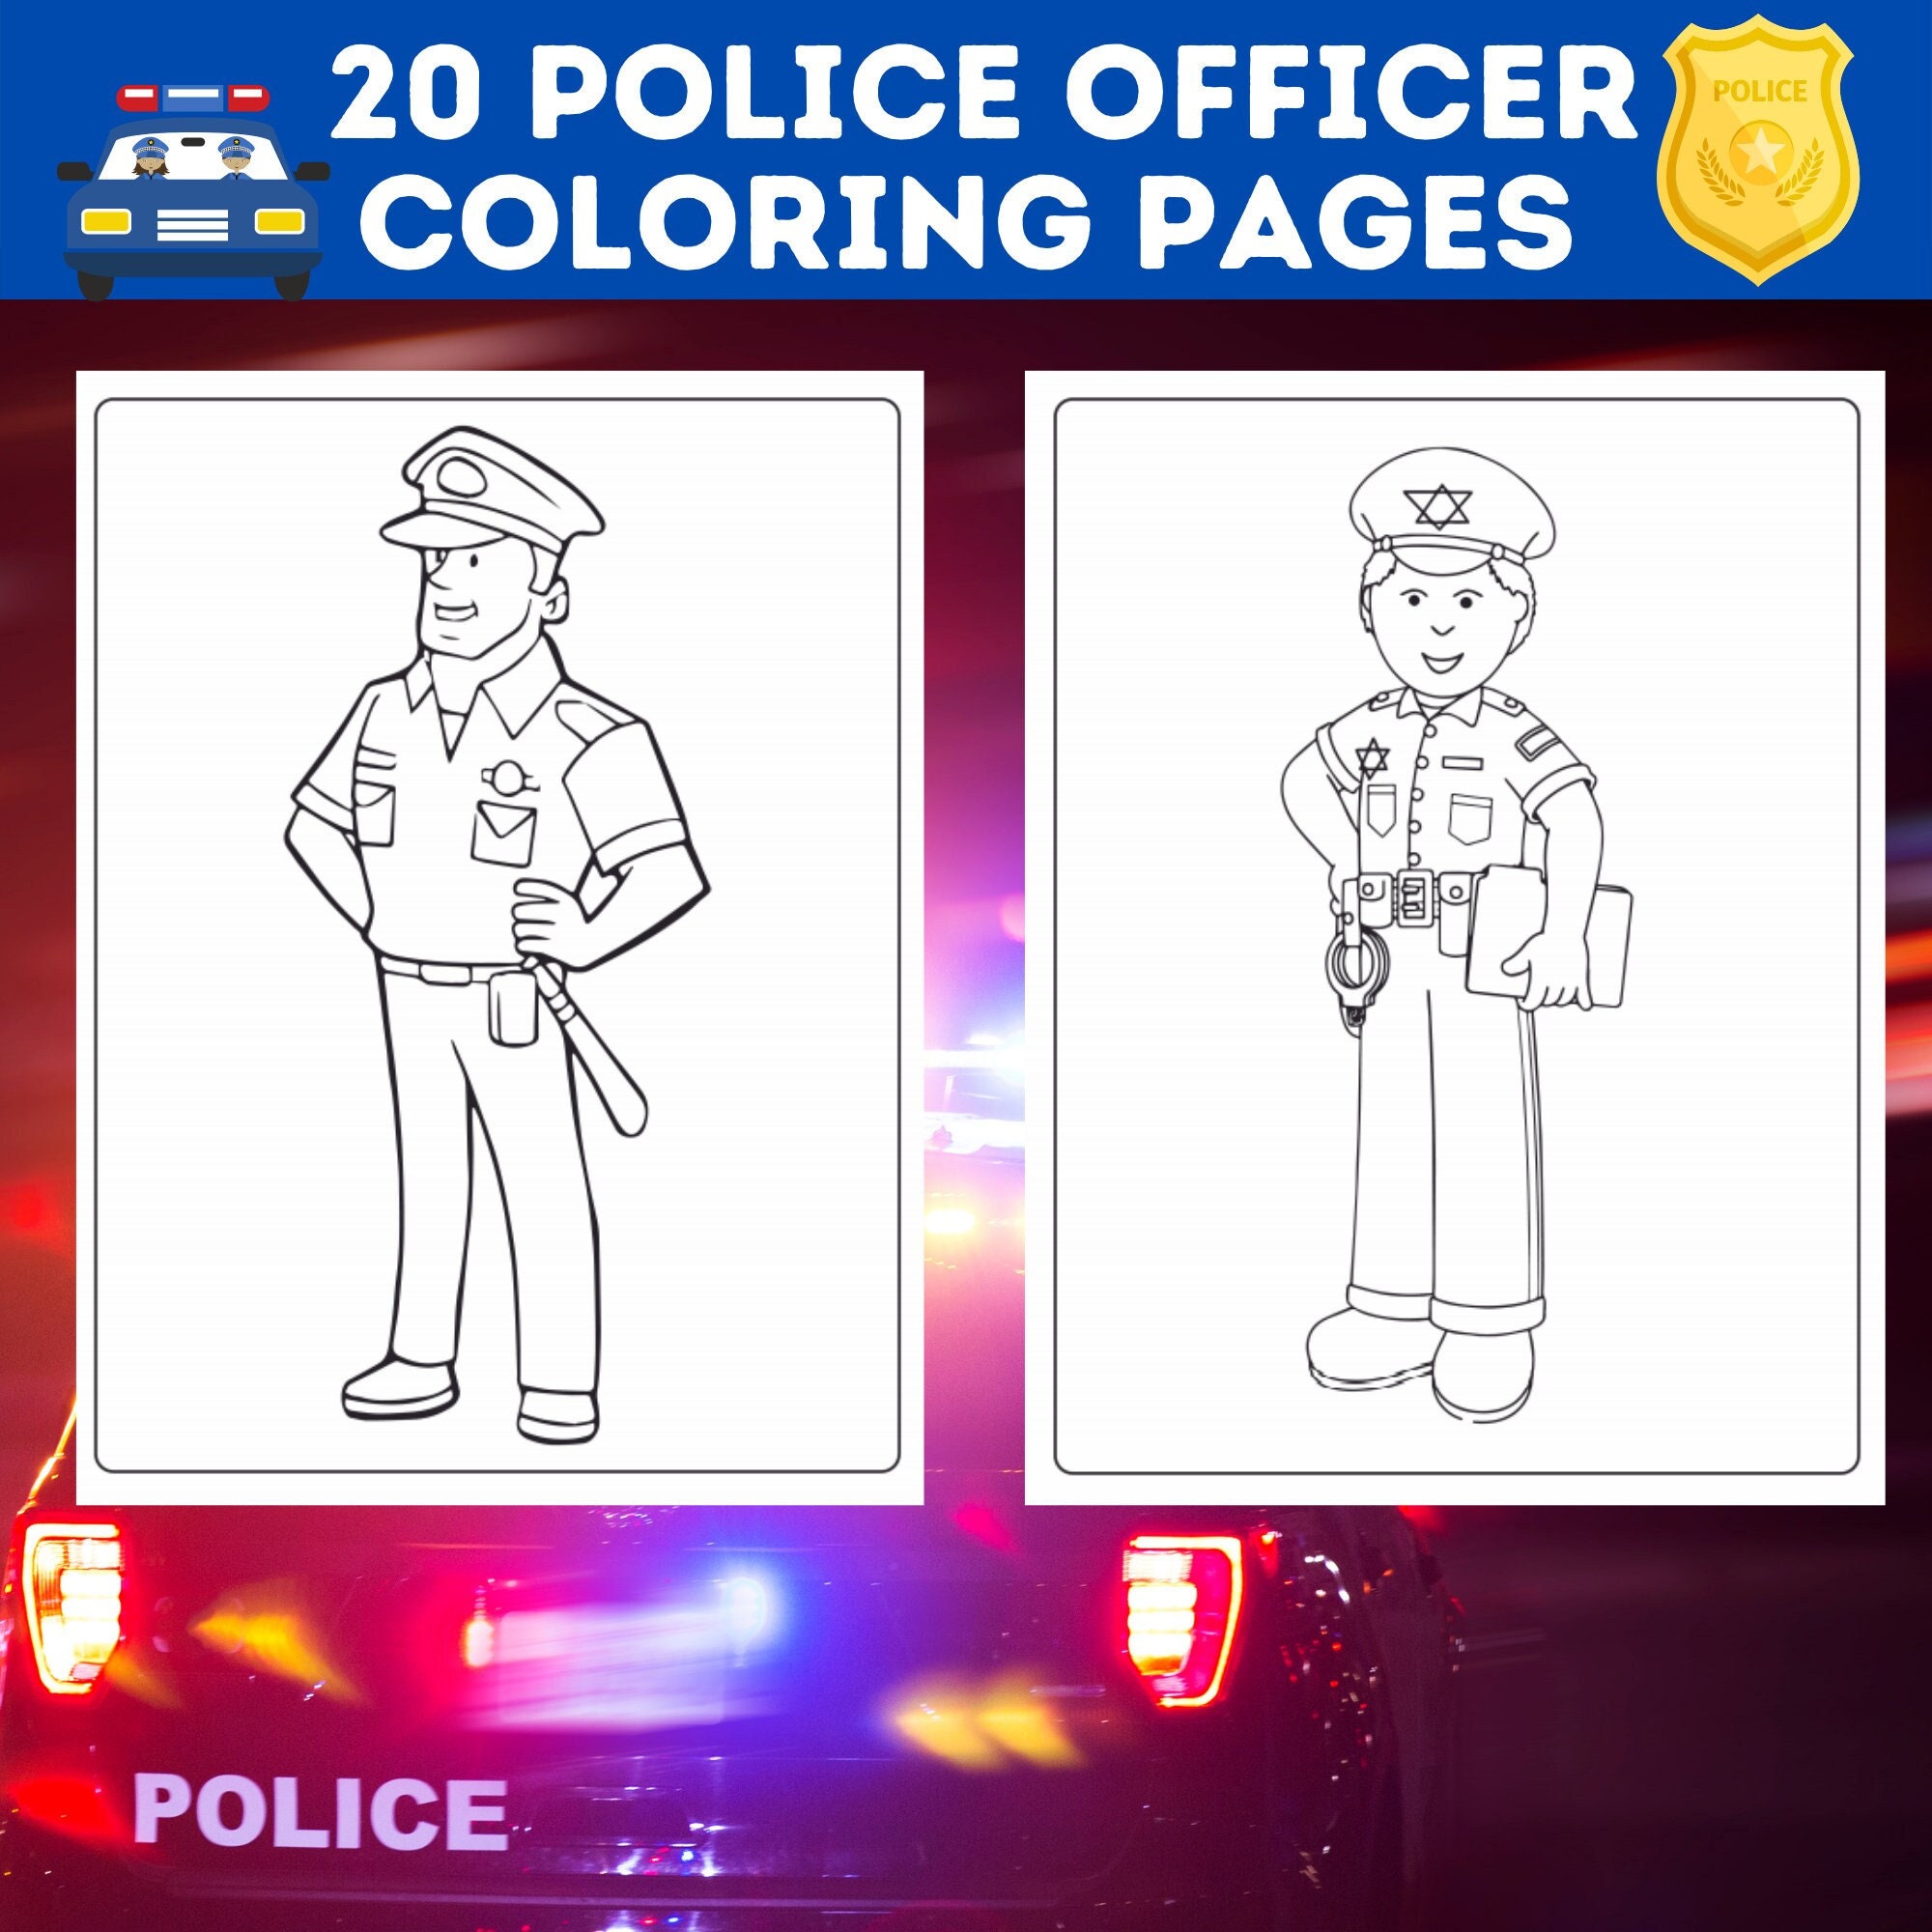 Police officer coloring pages bundle policeman policewoman printable policeman coloring book police officer picture instant download